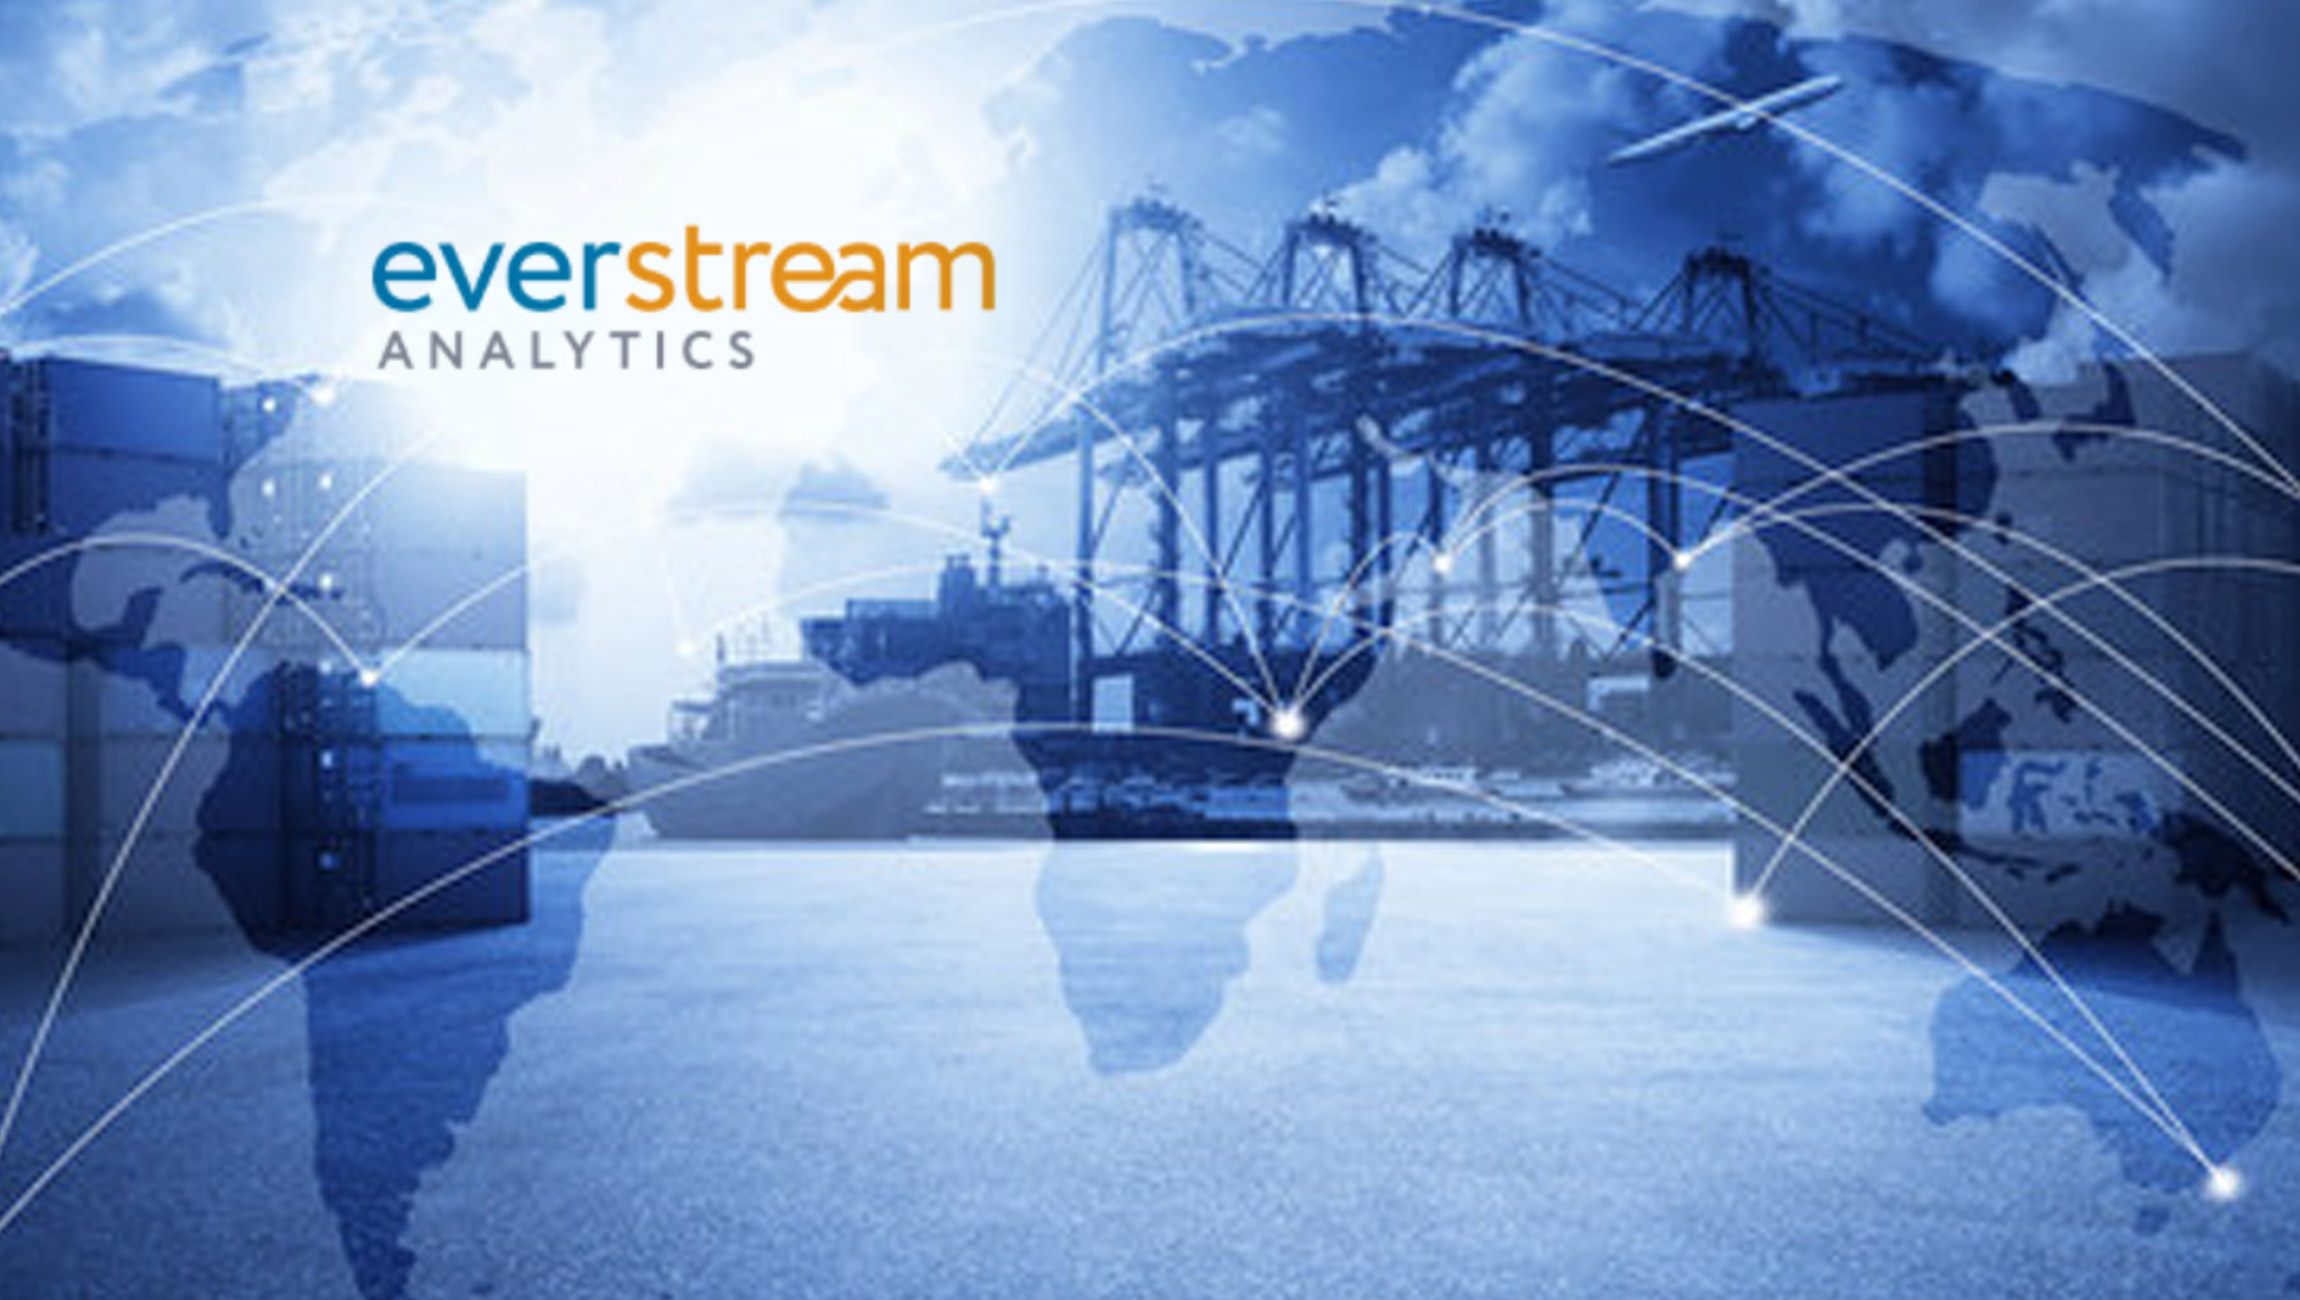 Everstream Analytics Announces New Major Event Monitoring Dashboard and ESG Visibility for Enhanced Supply Chain Resiliency and Sustainability